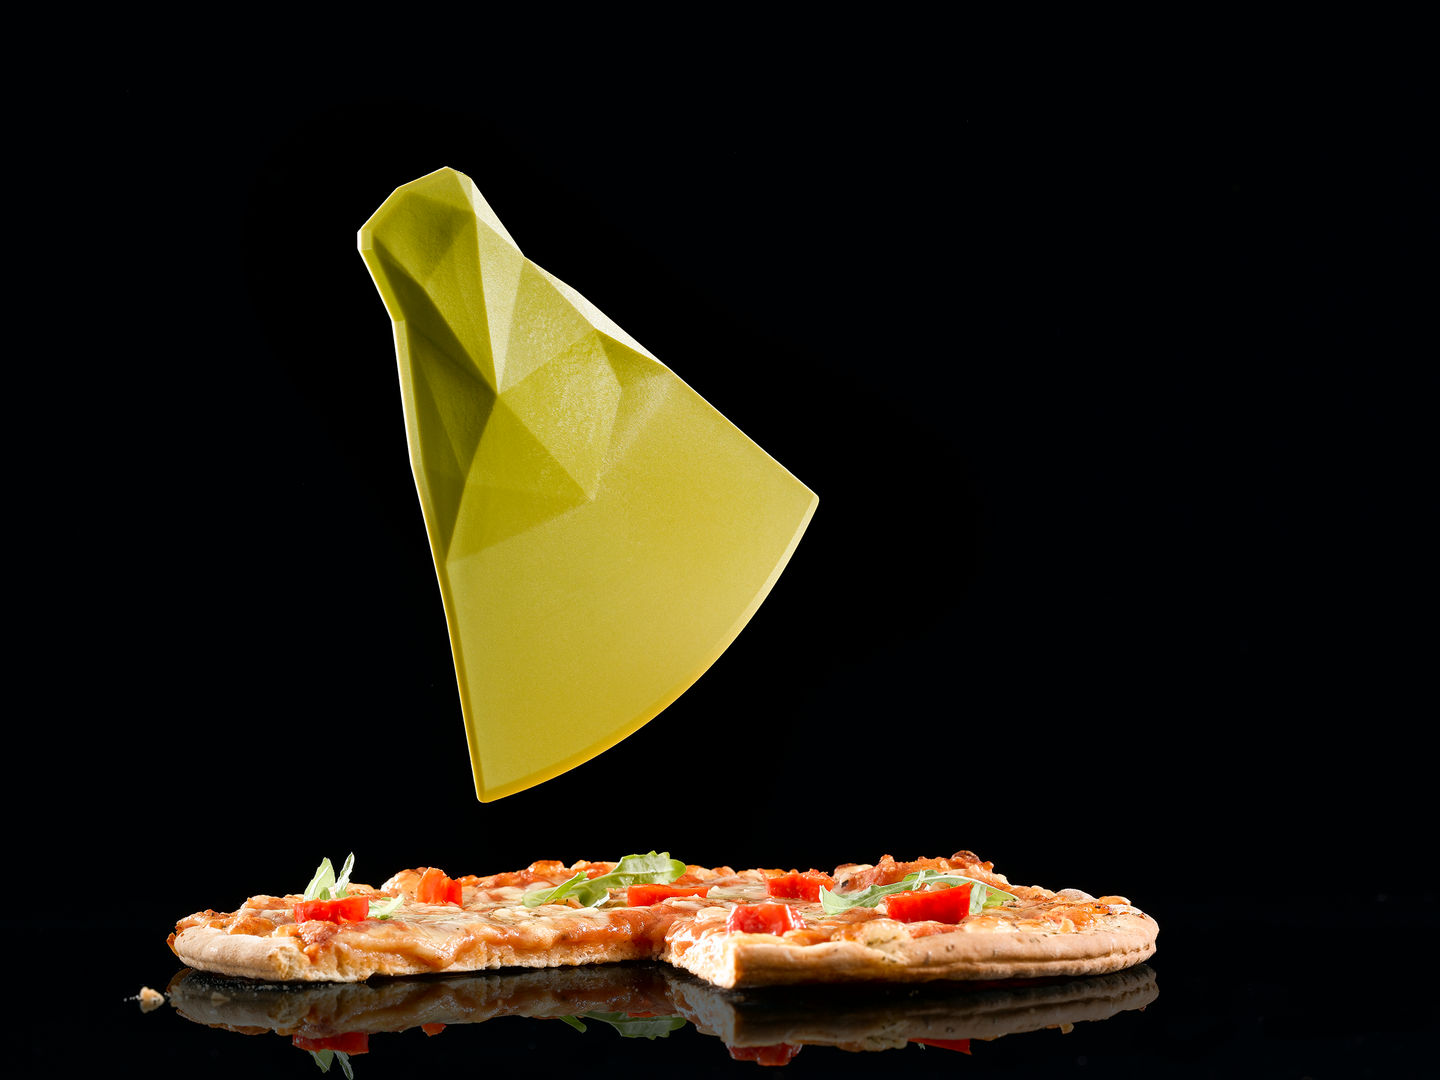 Kant decoupe-spatule a Pizza, ase product - serge atallah ase product - serge atallah Kitchen Kitchen utensils